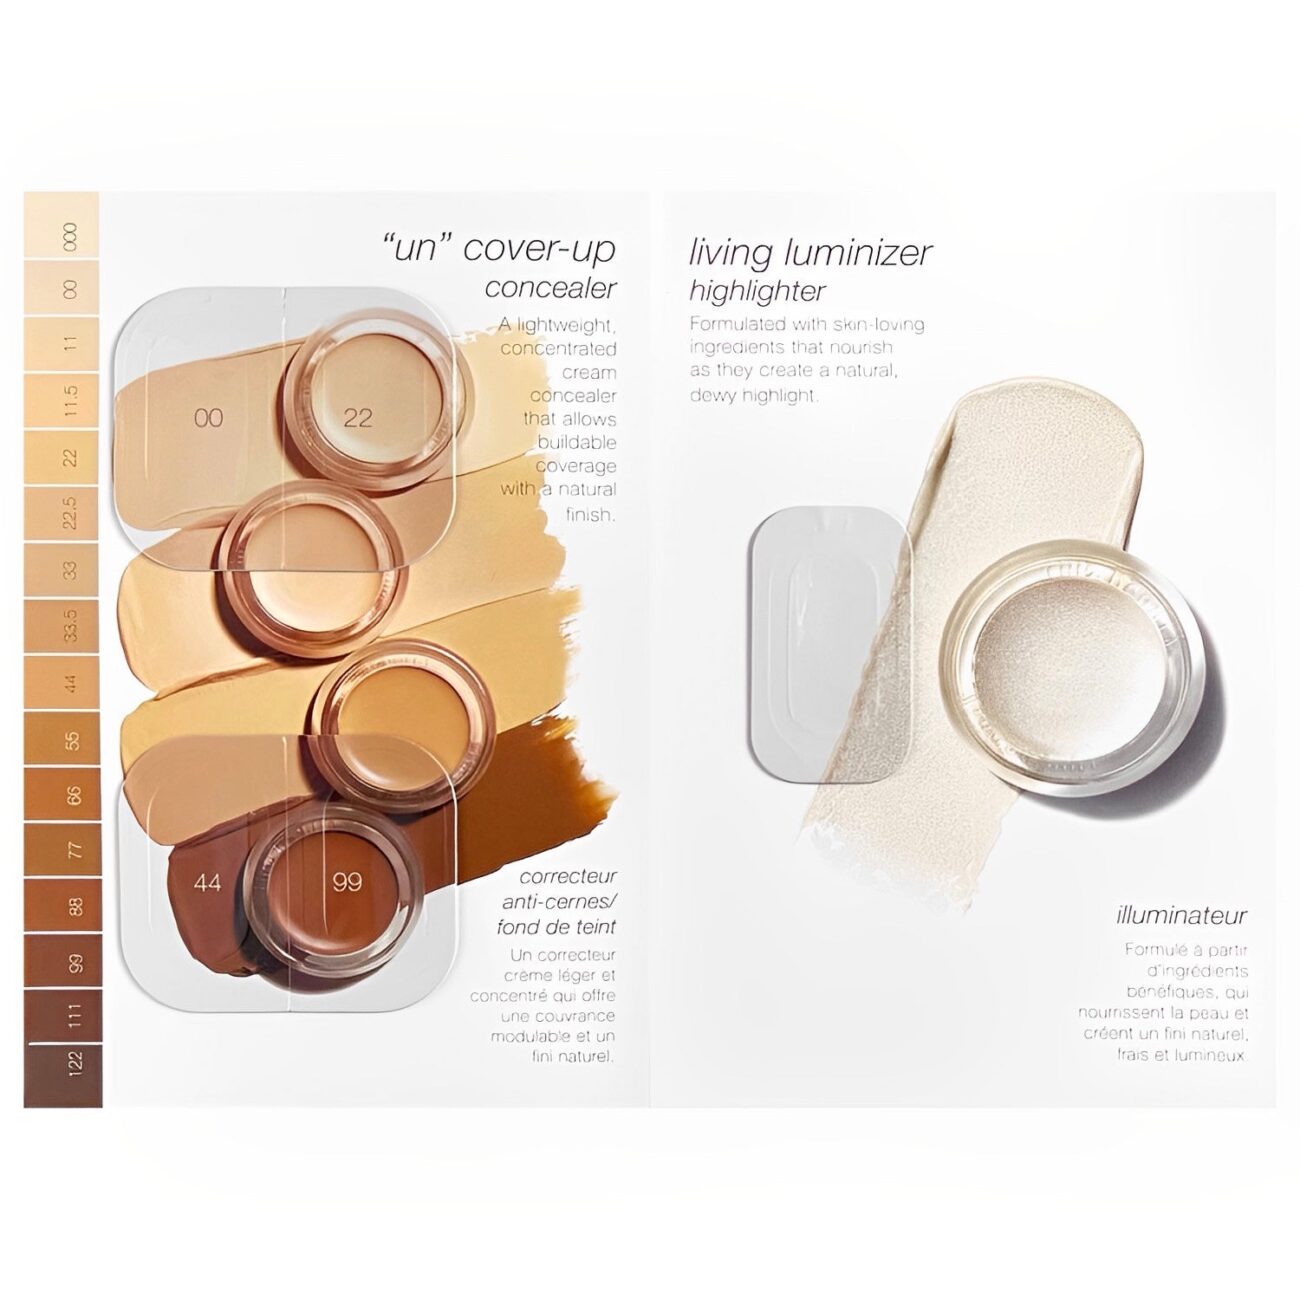 UnCoverup Concealer & Living Luminizer Sample-RMS Beauty